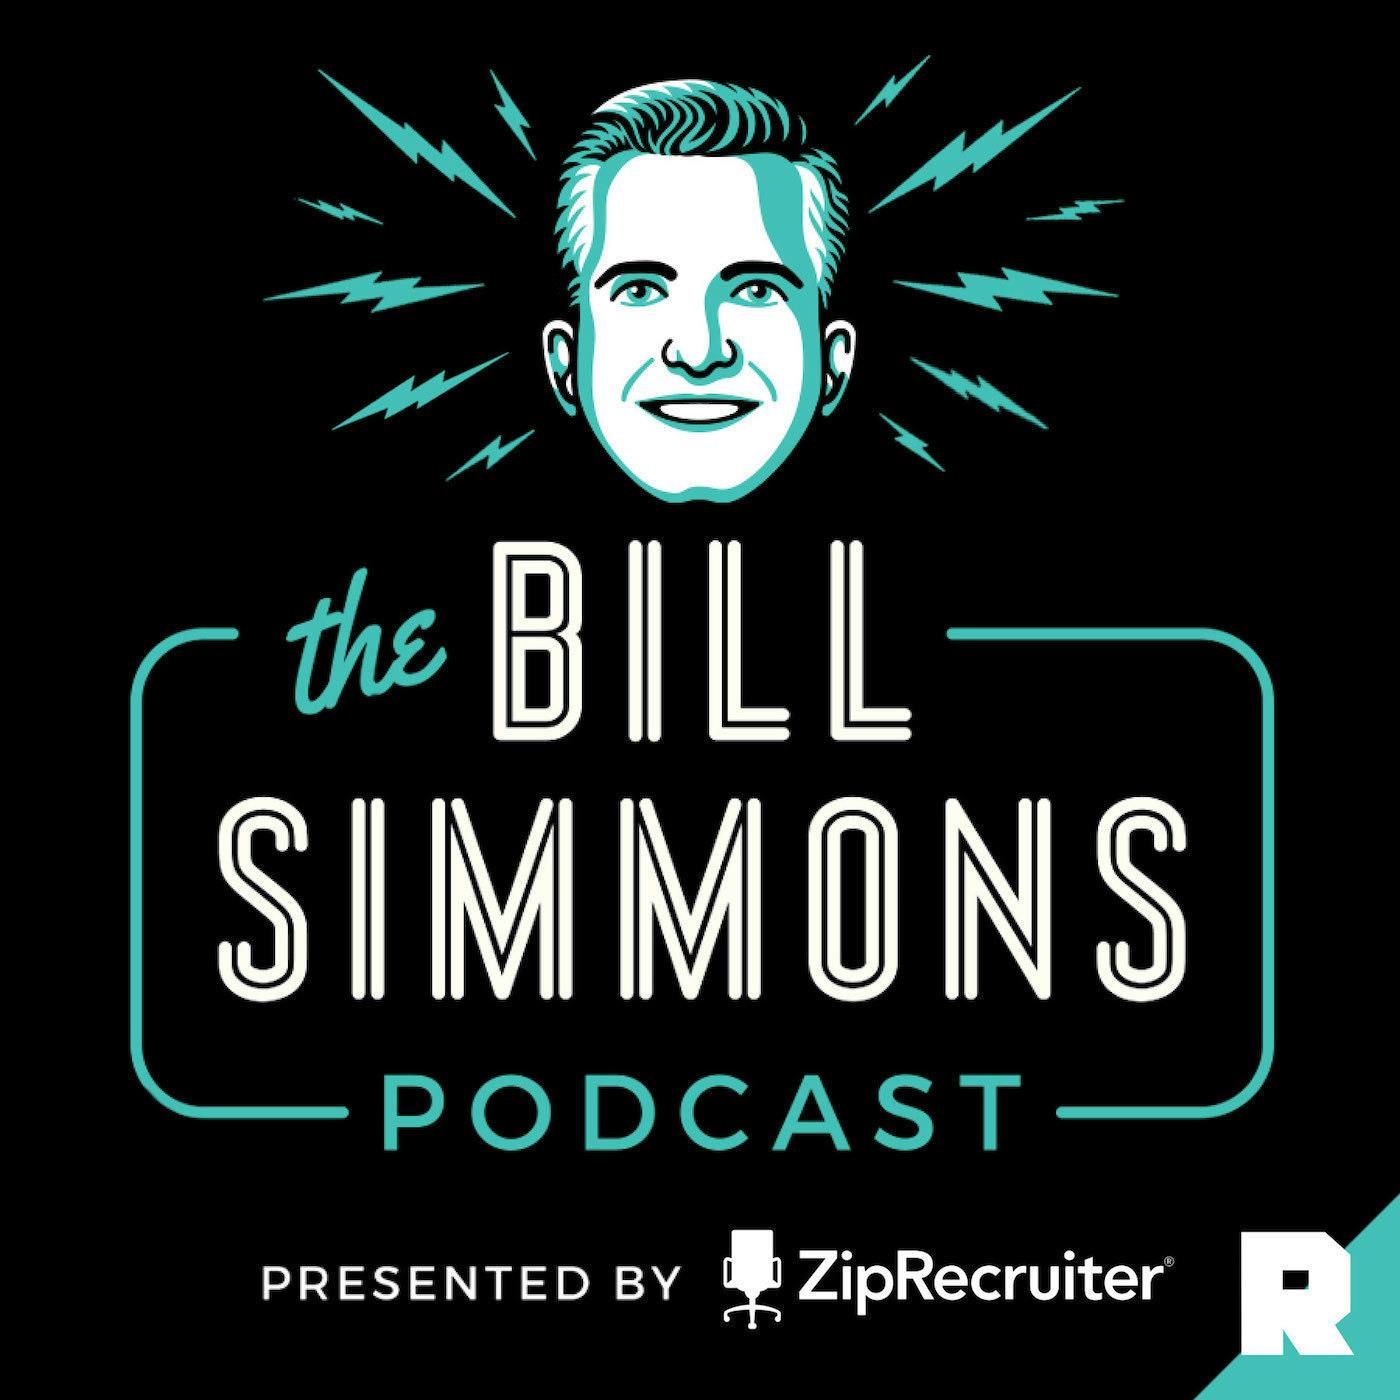 The Improbable Celtics, 'Cobra Kai,' and Bank Robbery Movies With Bill's Dad and Shea Serrano | The Bill Simmons Podcast (Ep. 366)